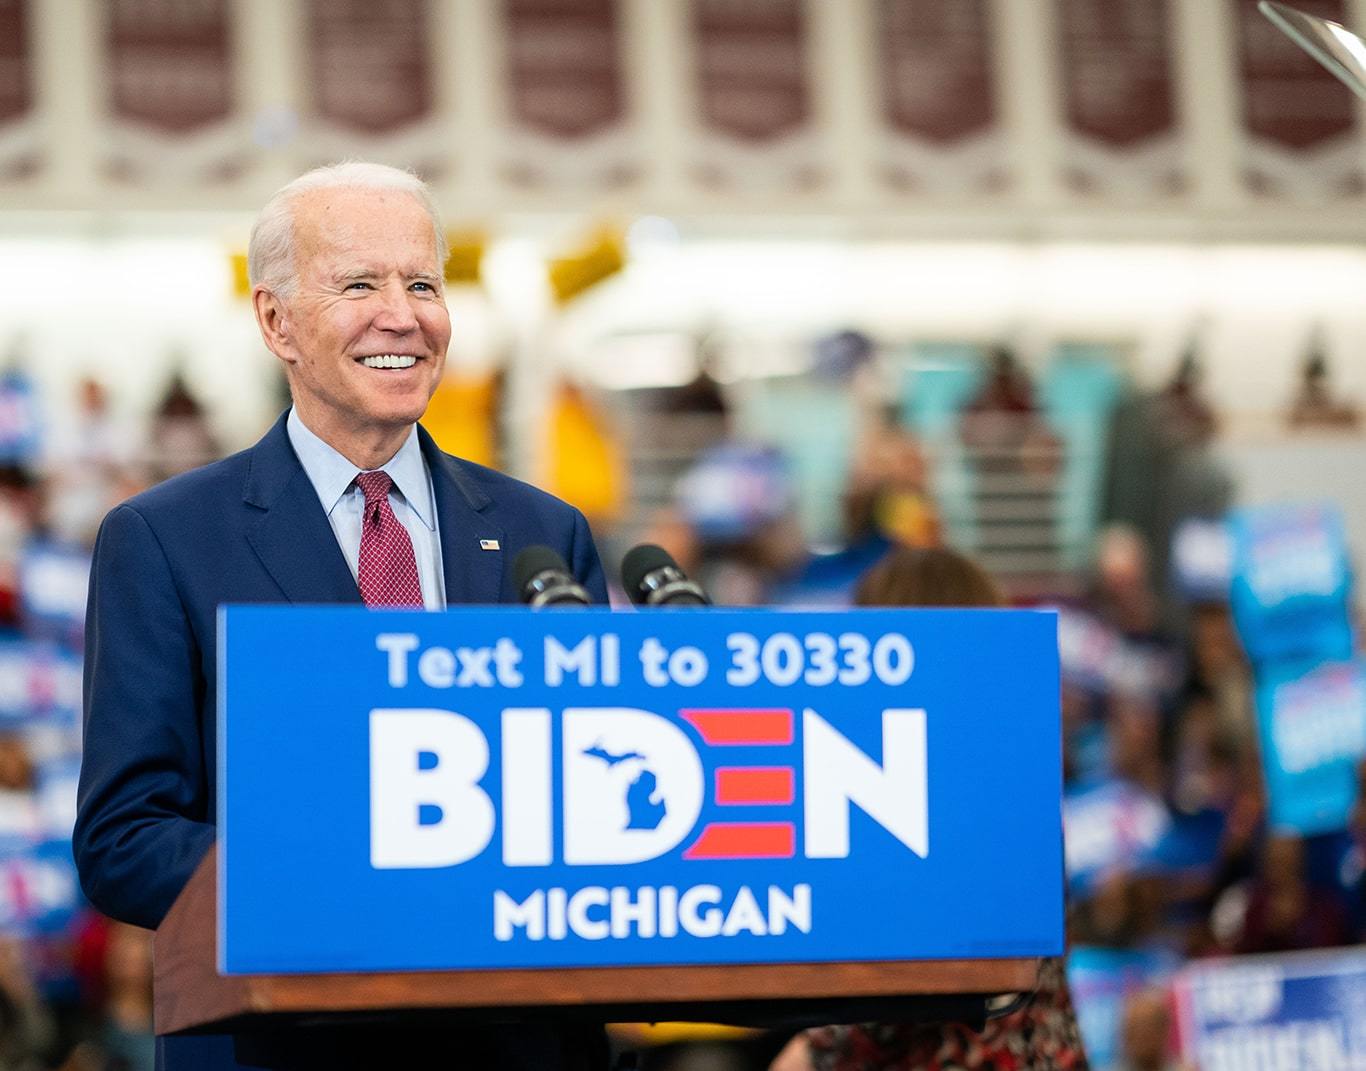 Joe Biden smiling at a podium during a rally in Michigan. He is wearing a blue suit, red tie, and an American flag pin.